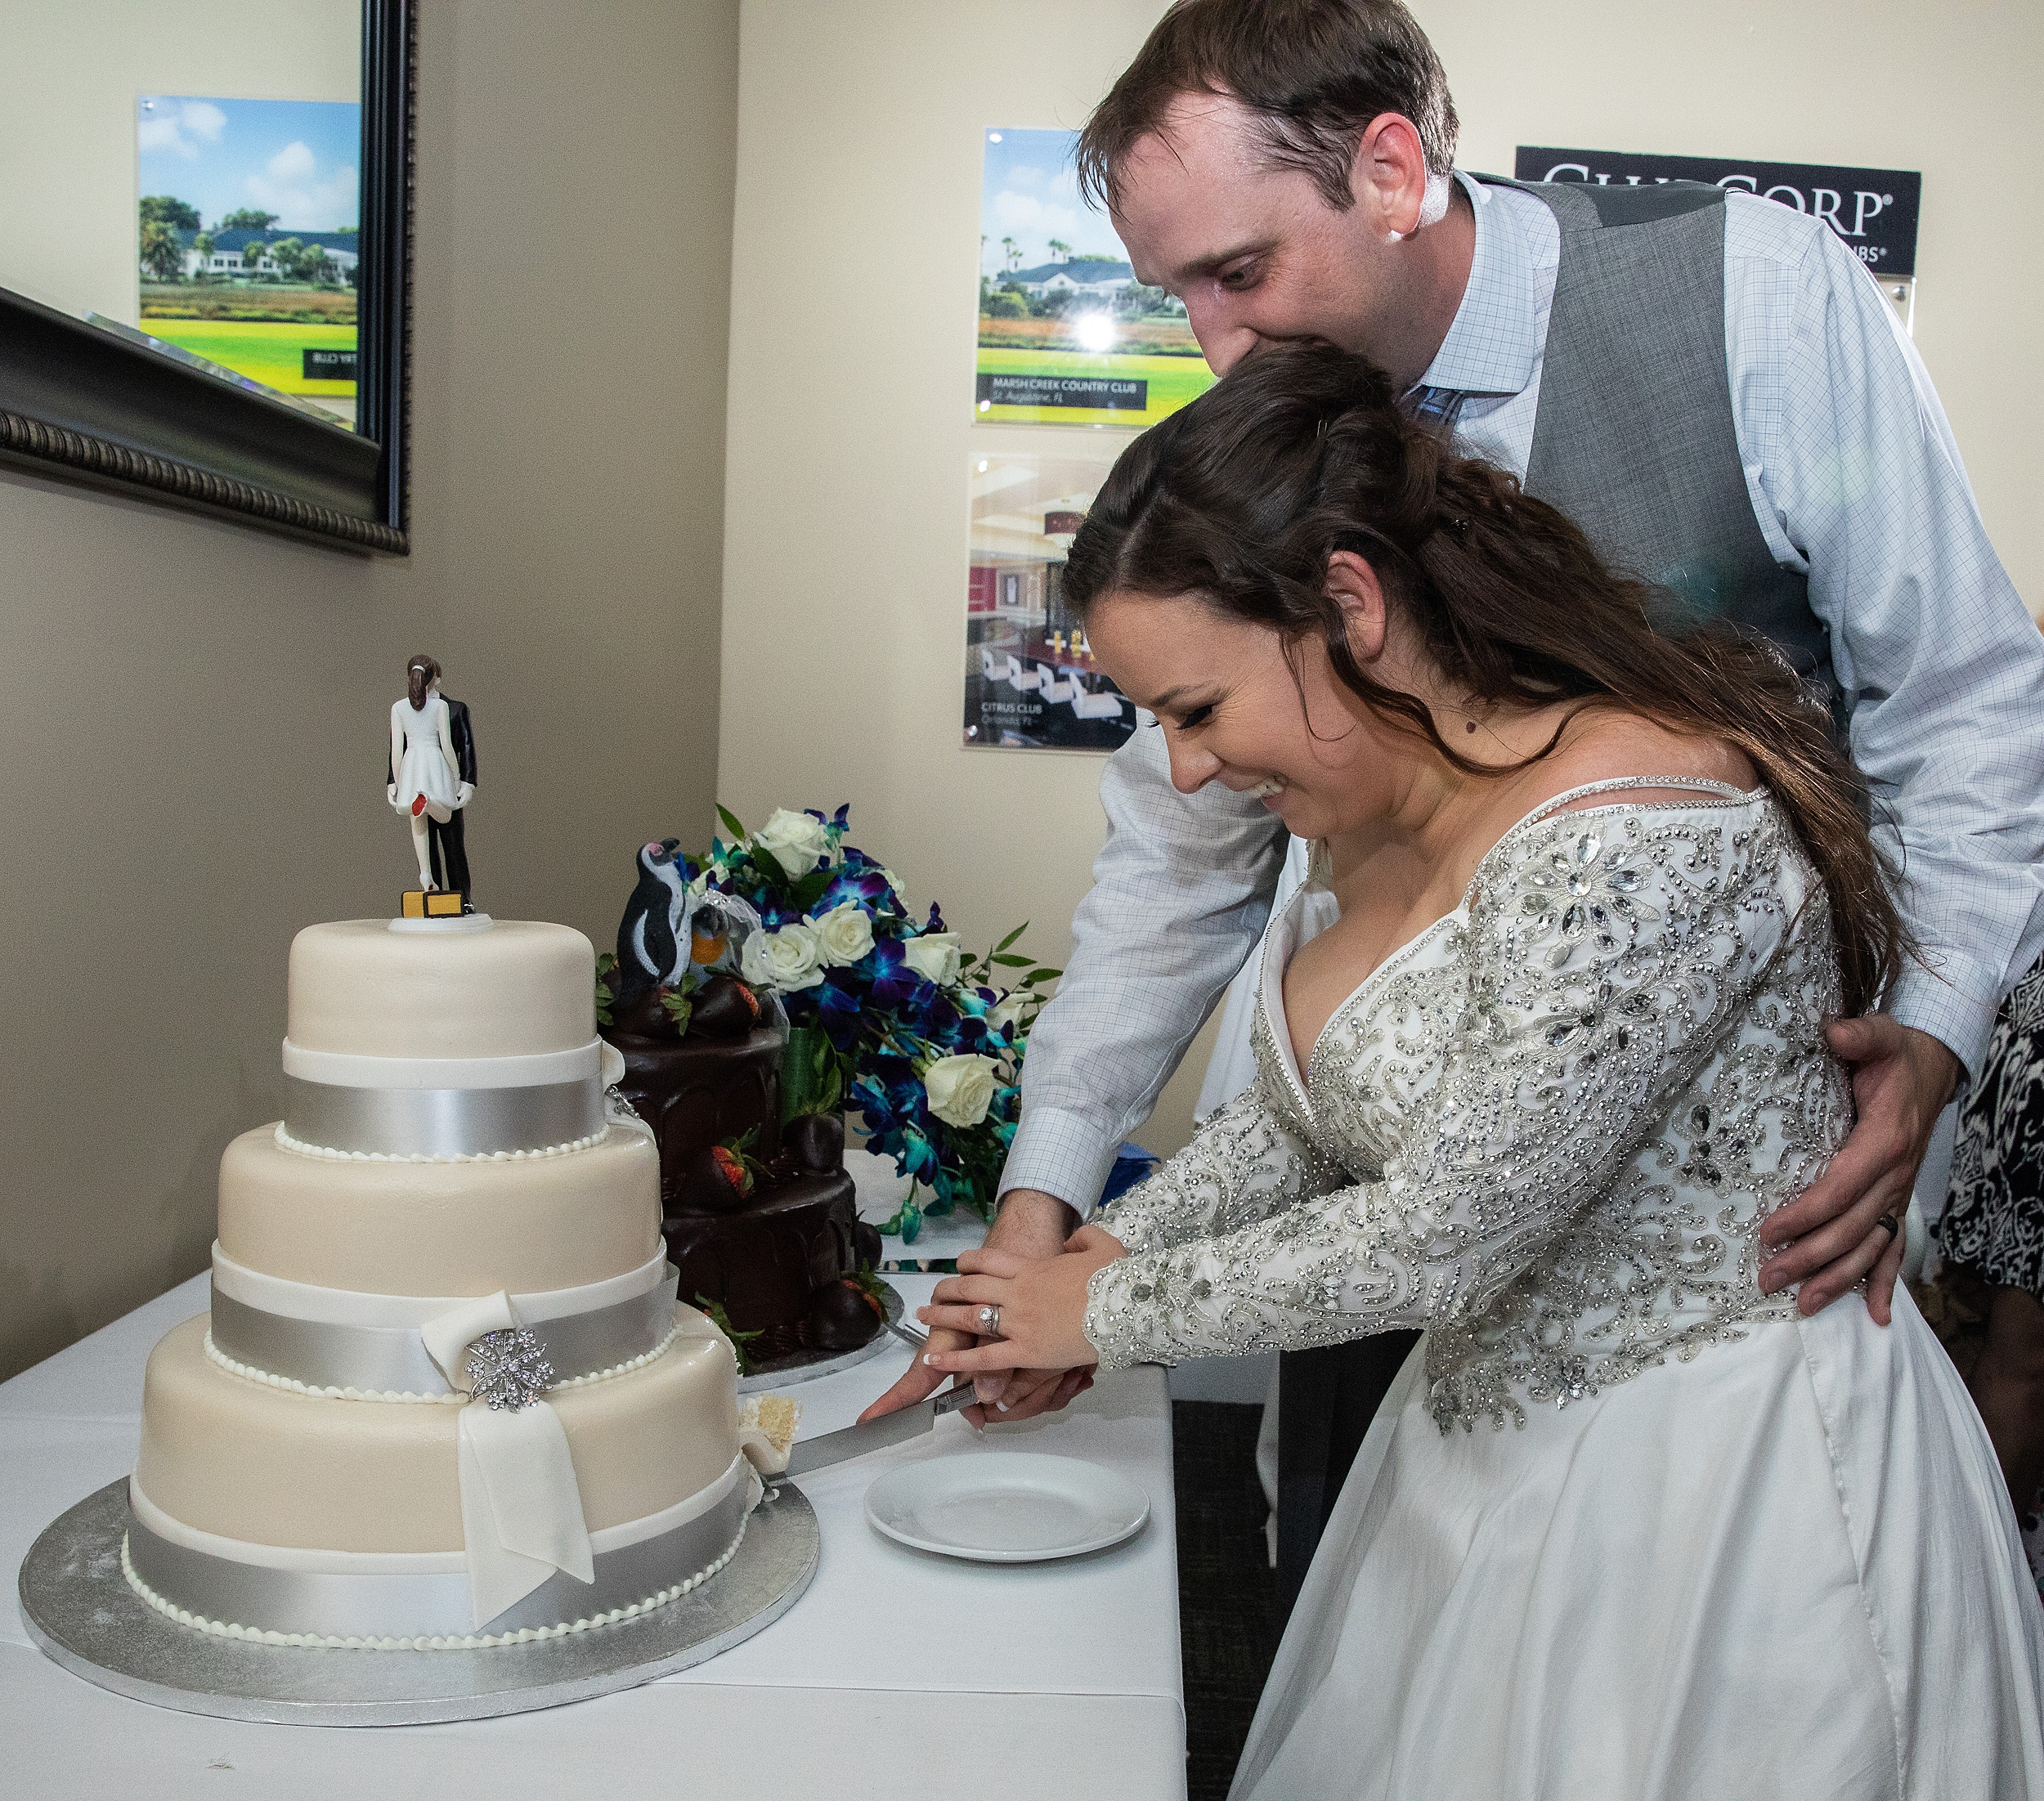 Newlyweds cut their three tier cake together in a grey vest and embroidered dress